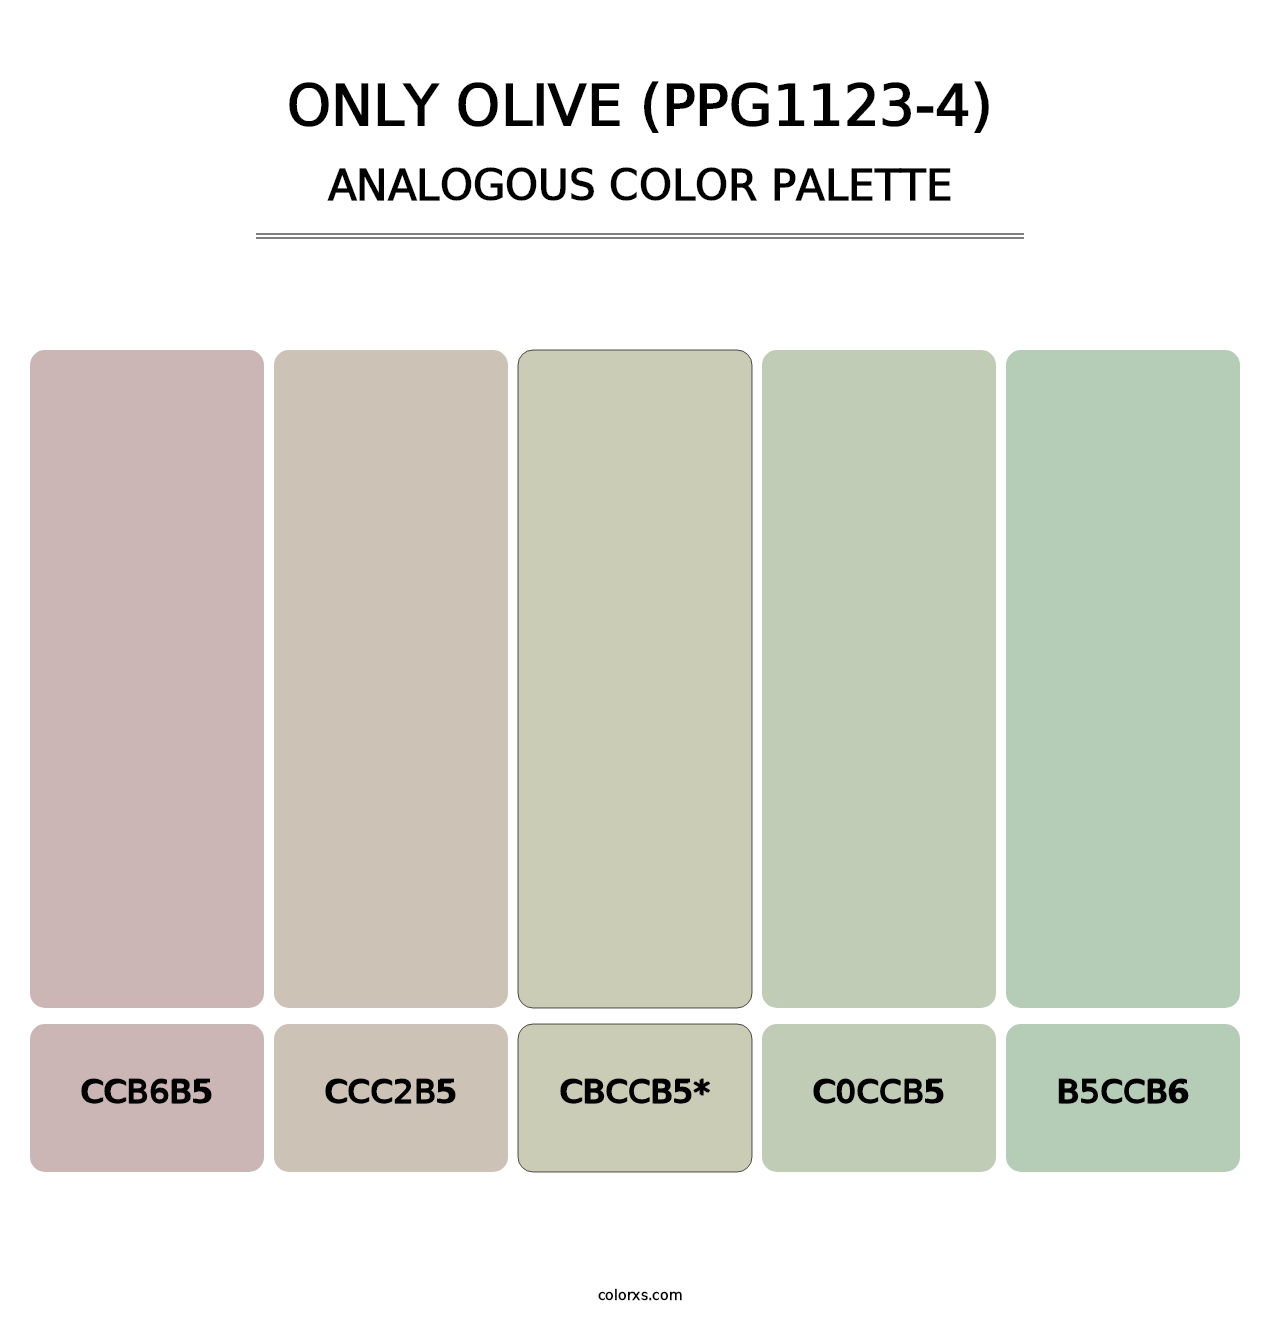 Only Olive (PPG1123-4) - Analogous Color Palette